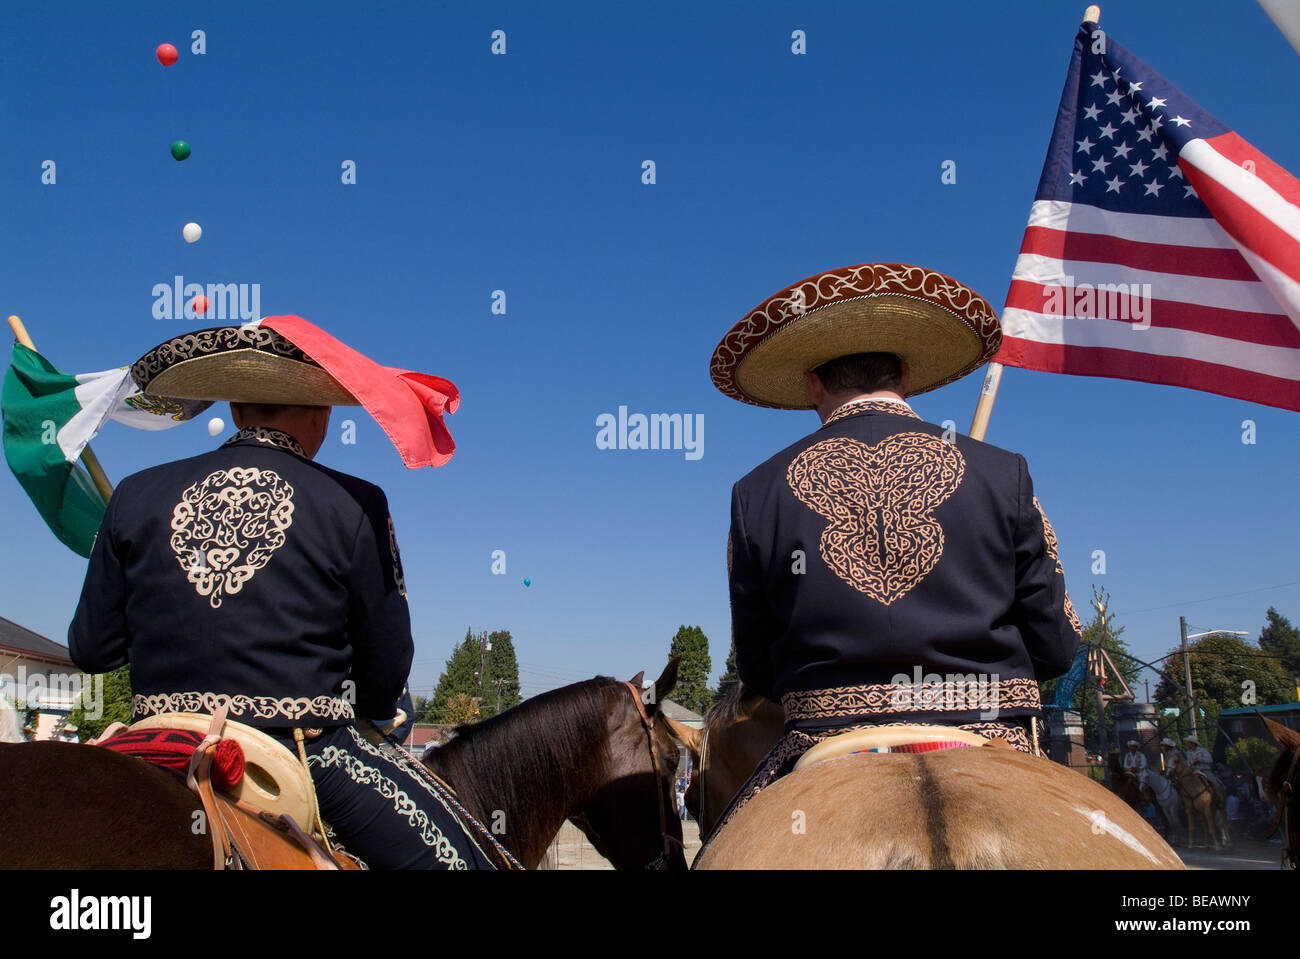 Two Mexican American cowboys holding American and Mexican flags. Stock Photo